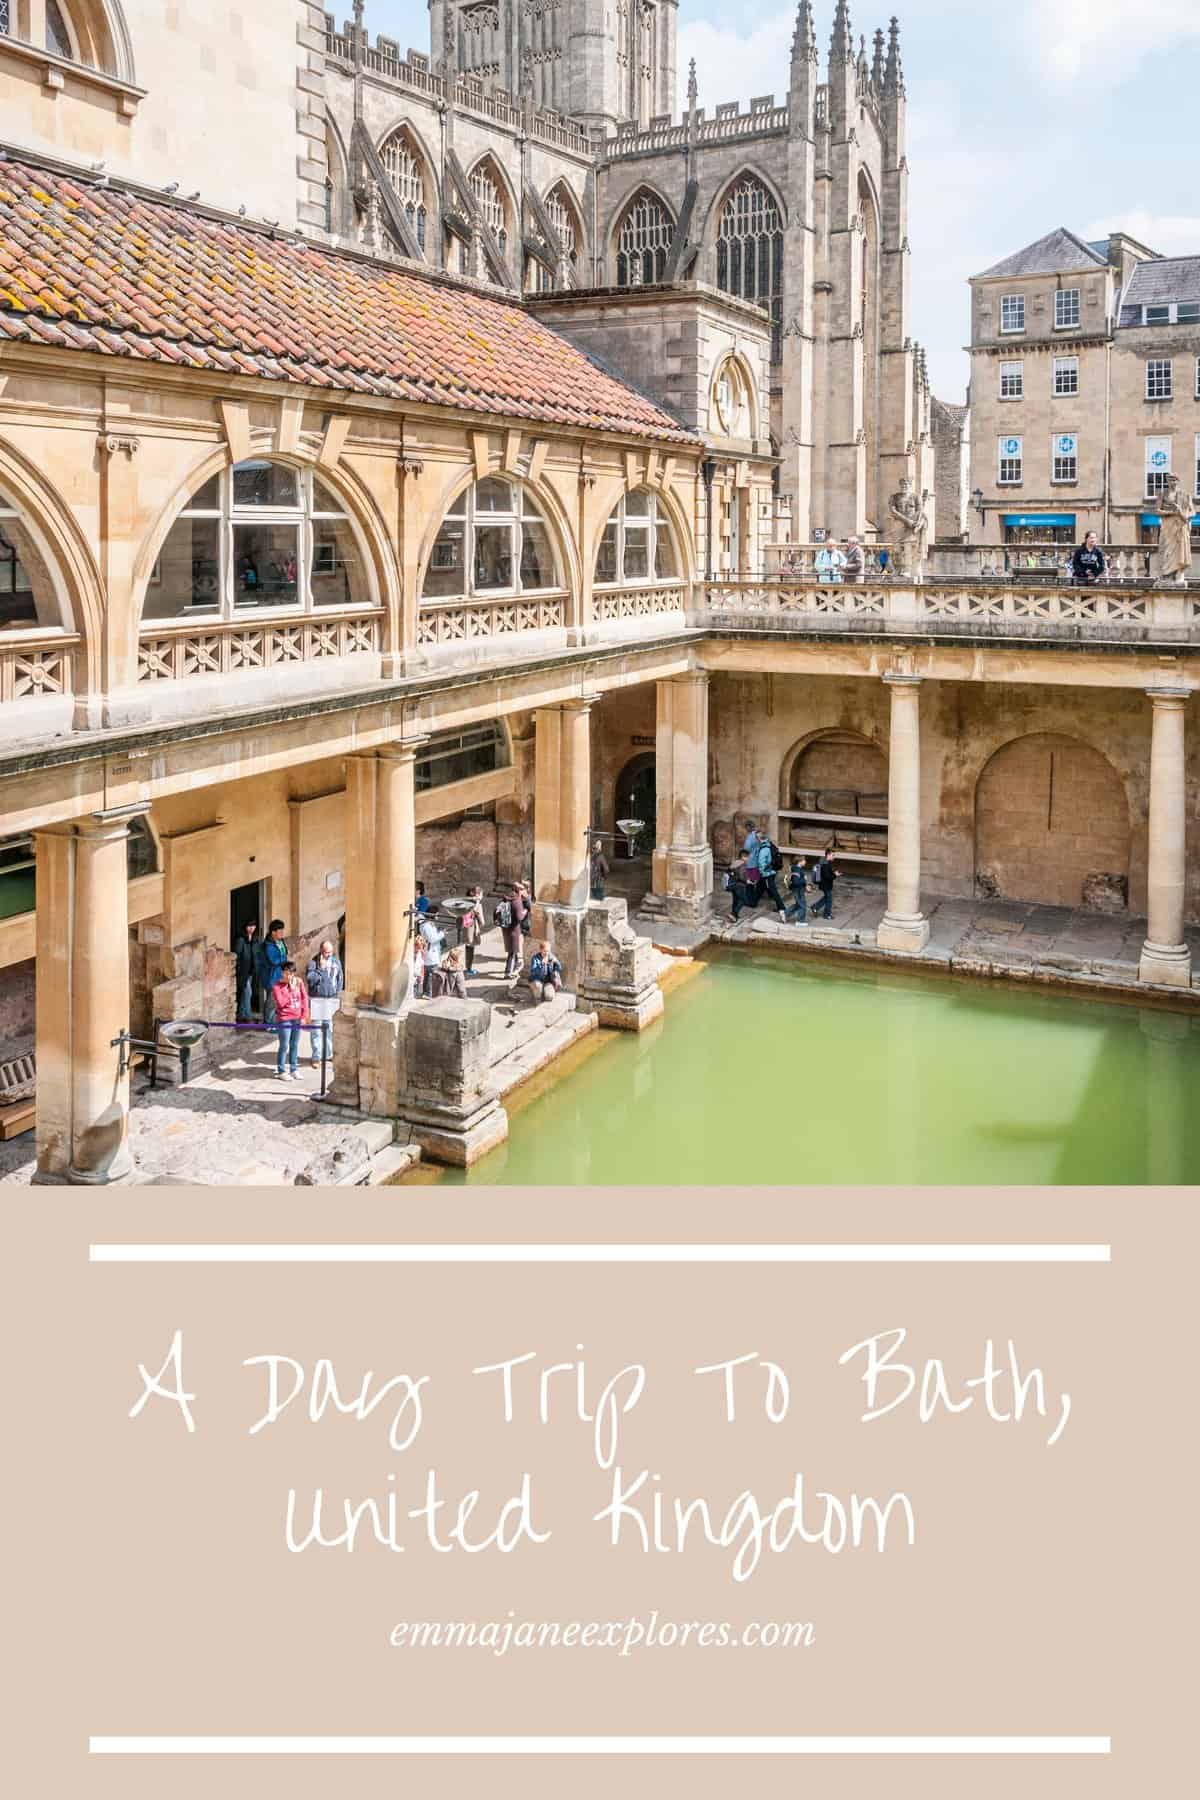 A Day Trip To Bath From London - Emma Jane Explores